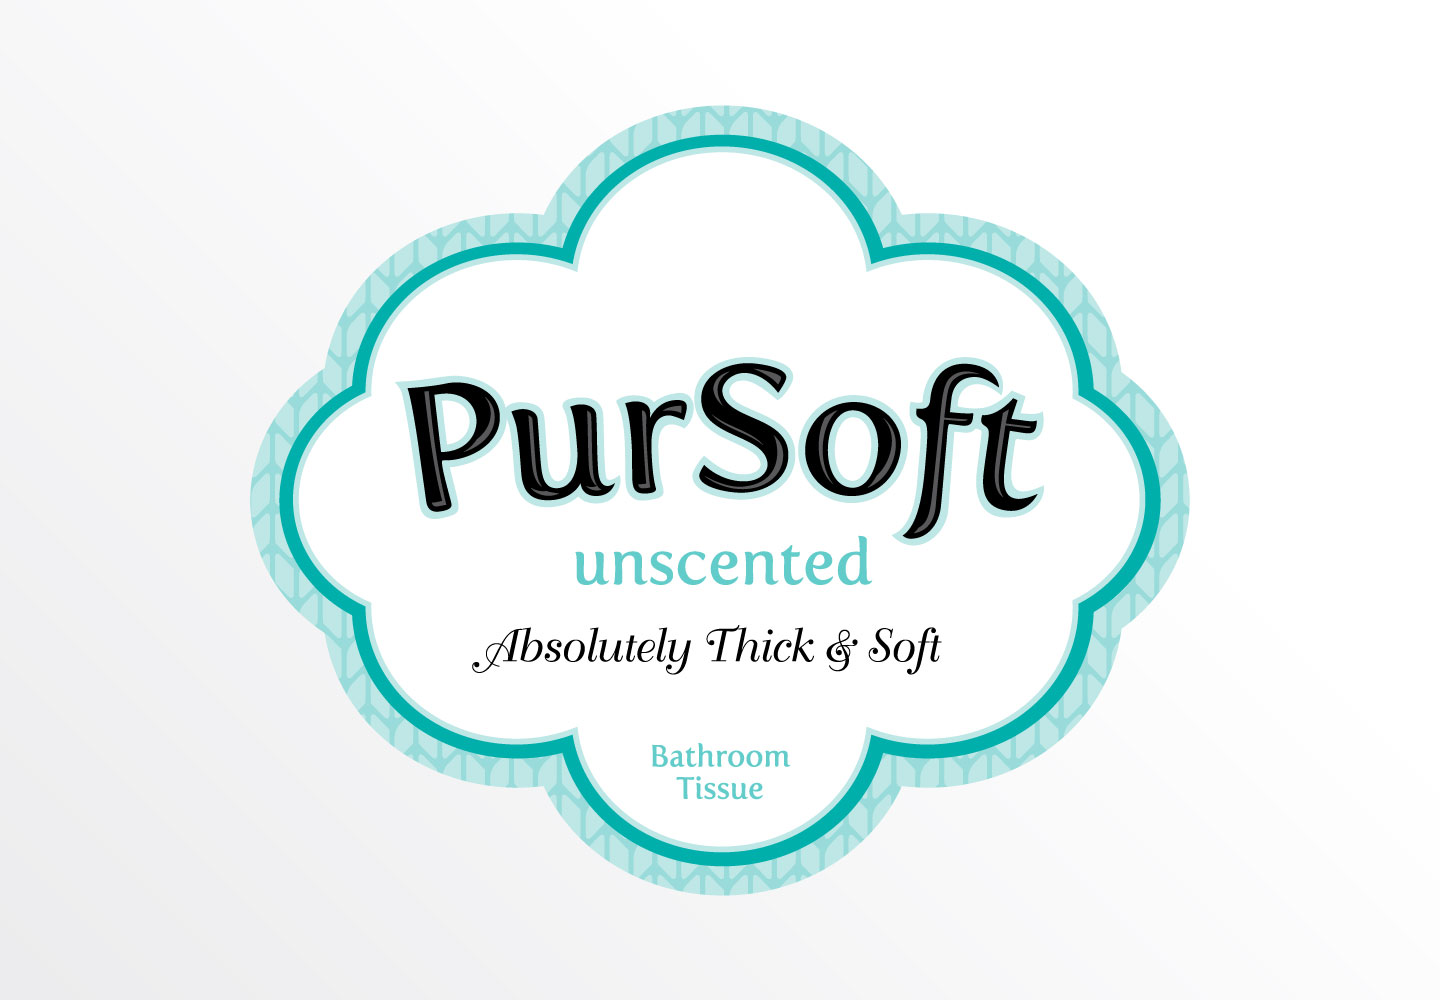 Brand Consultancy in FMCG Industry. Logo design for Pursoft.